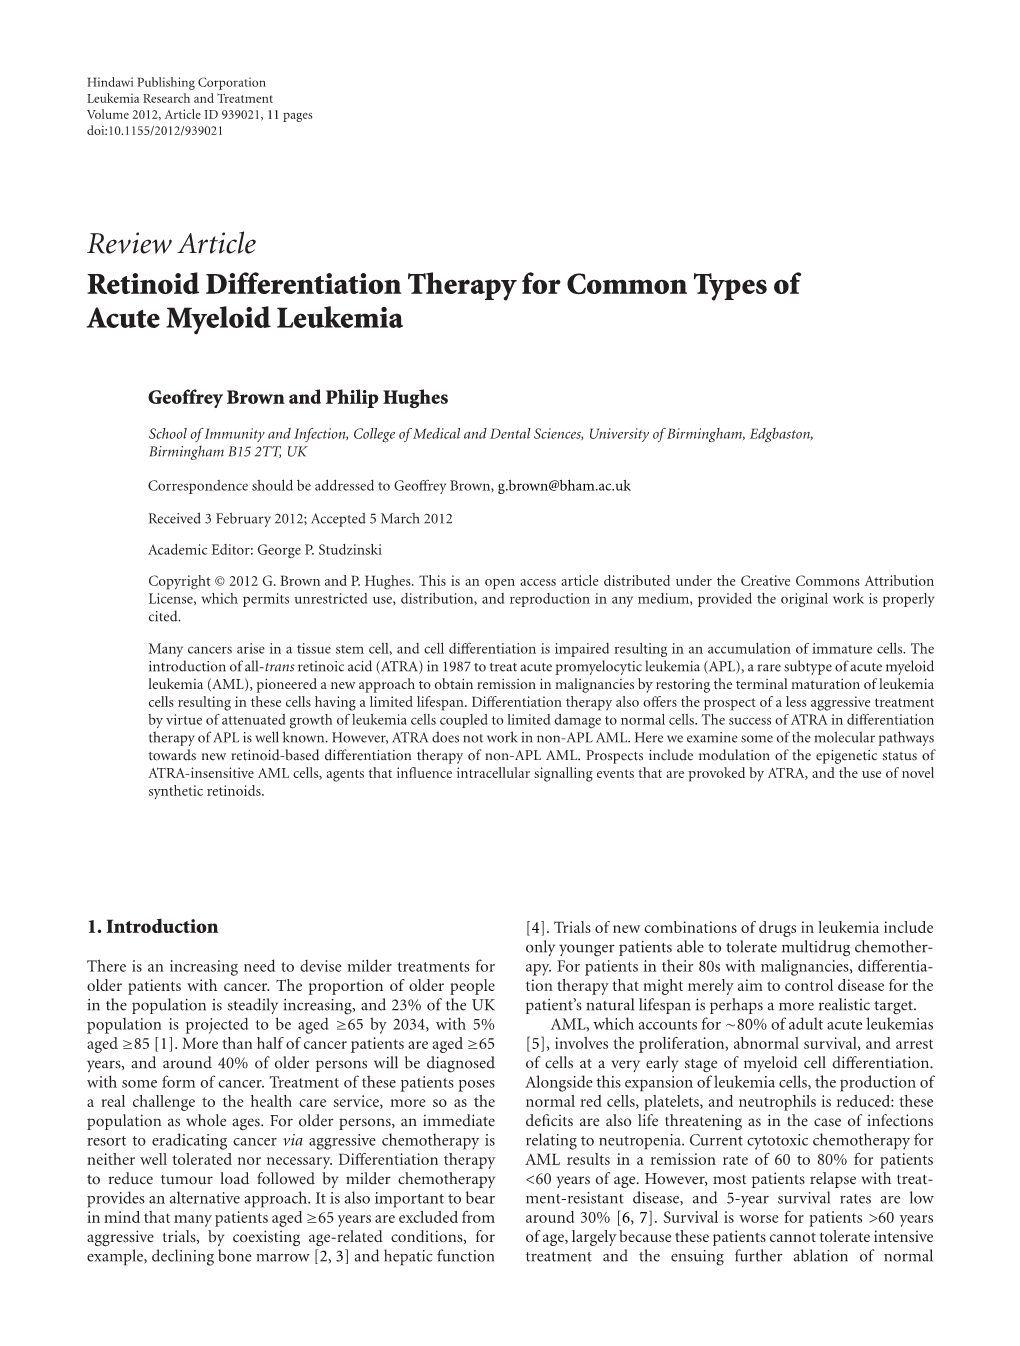 Review Article Retinoid Differentiation Therapy for Common Types of Acute Myeloid Leukemia